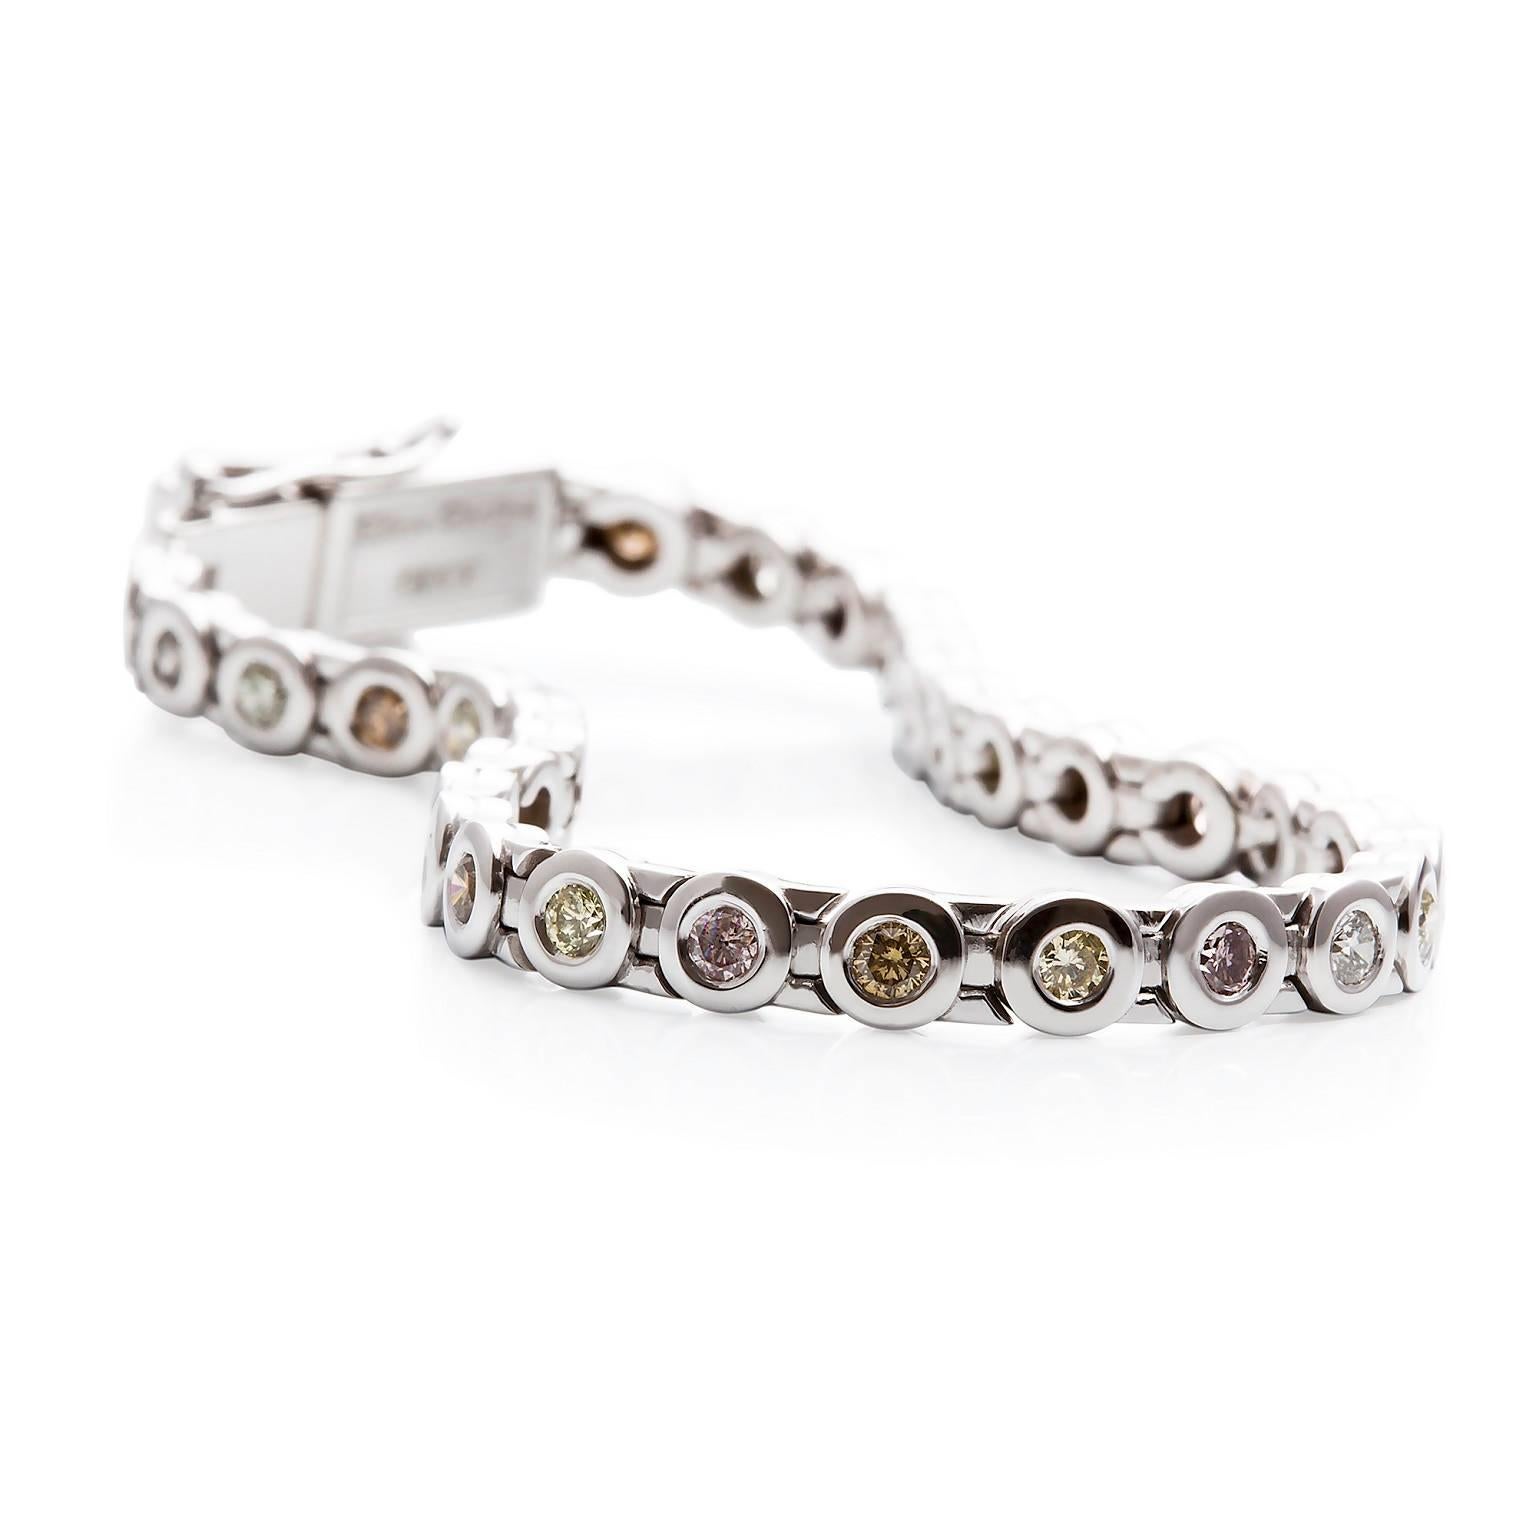 Festivo Diamond Tennis Bracelet

The stunning 18ct white gold tennis bracelet is set with 35 chenier set diamonds and is completed with an ultra safe box clasp. A twist on a classic!

Round brilliant cut diamonds: 35 = 2.12ct total weight, Multiple